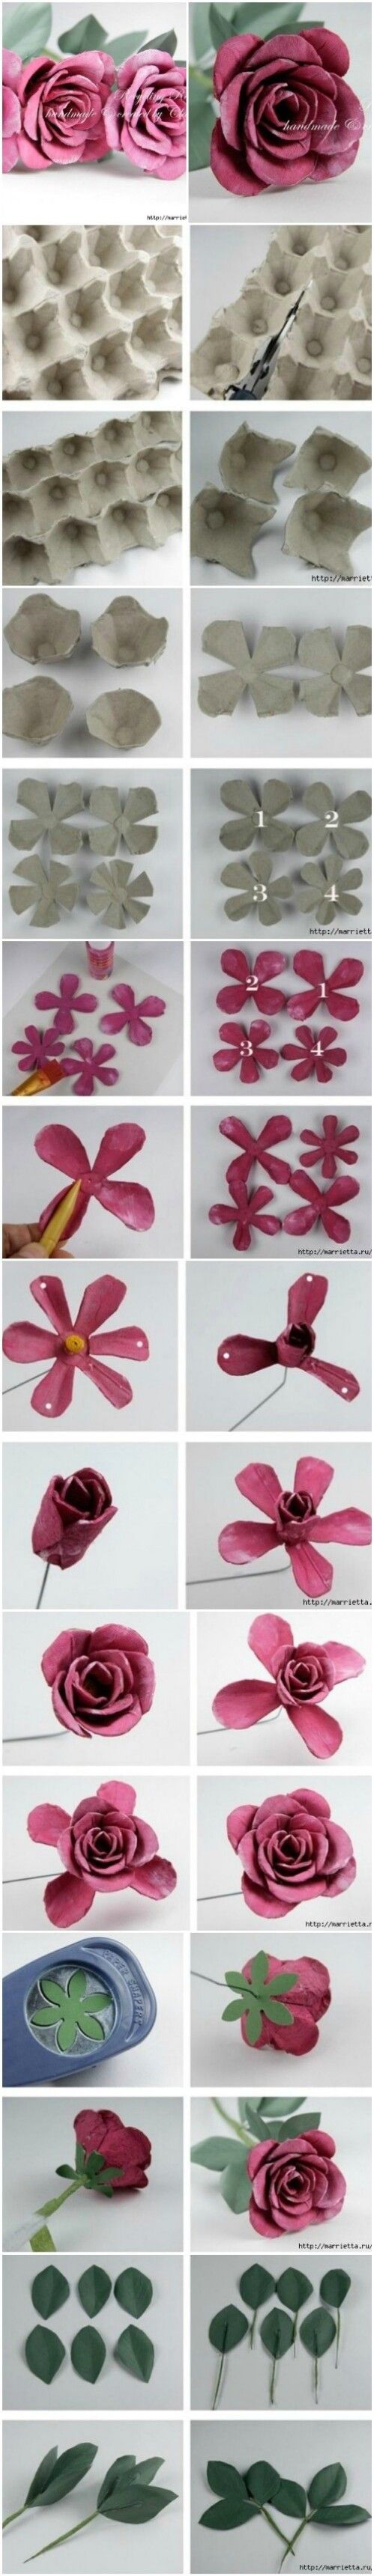 Love these recycled crafts. The roses are especially stunning.